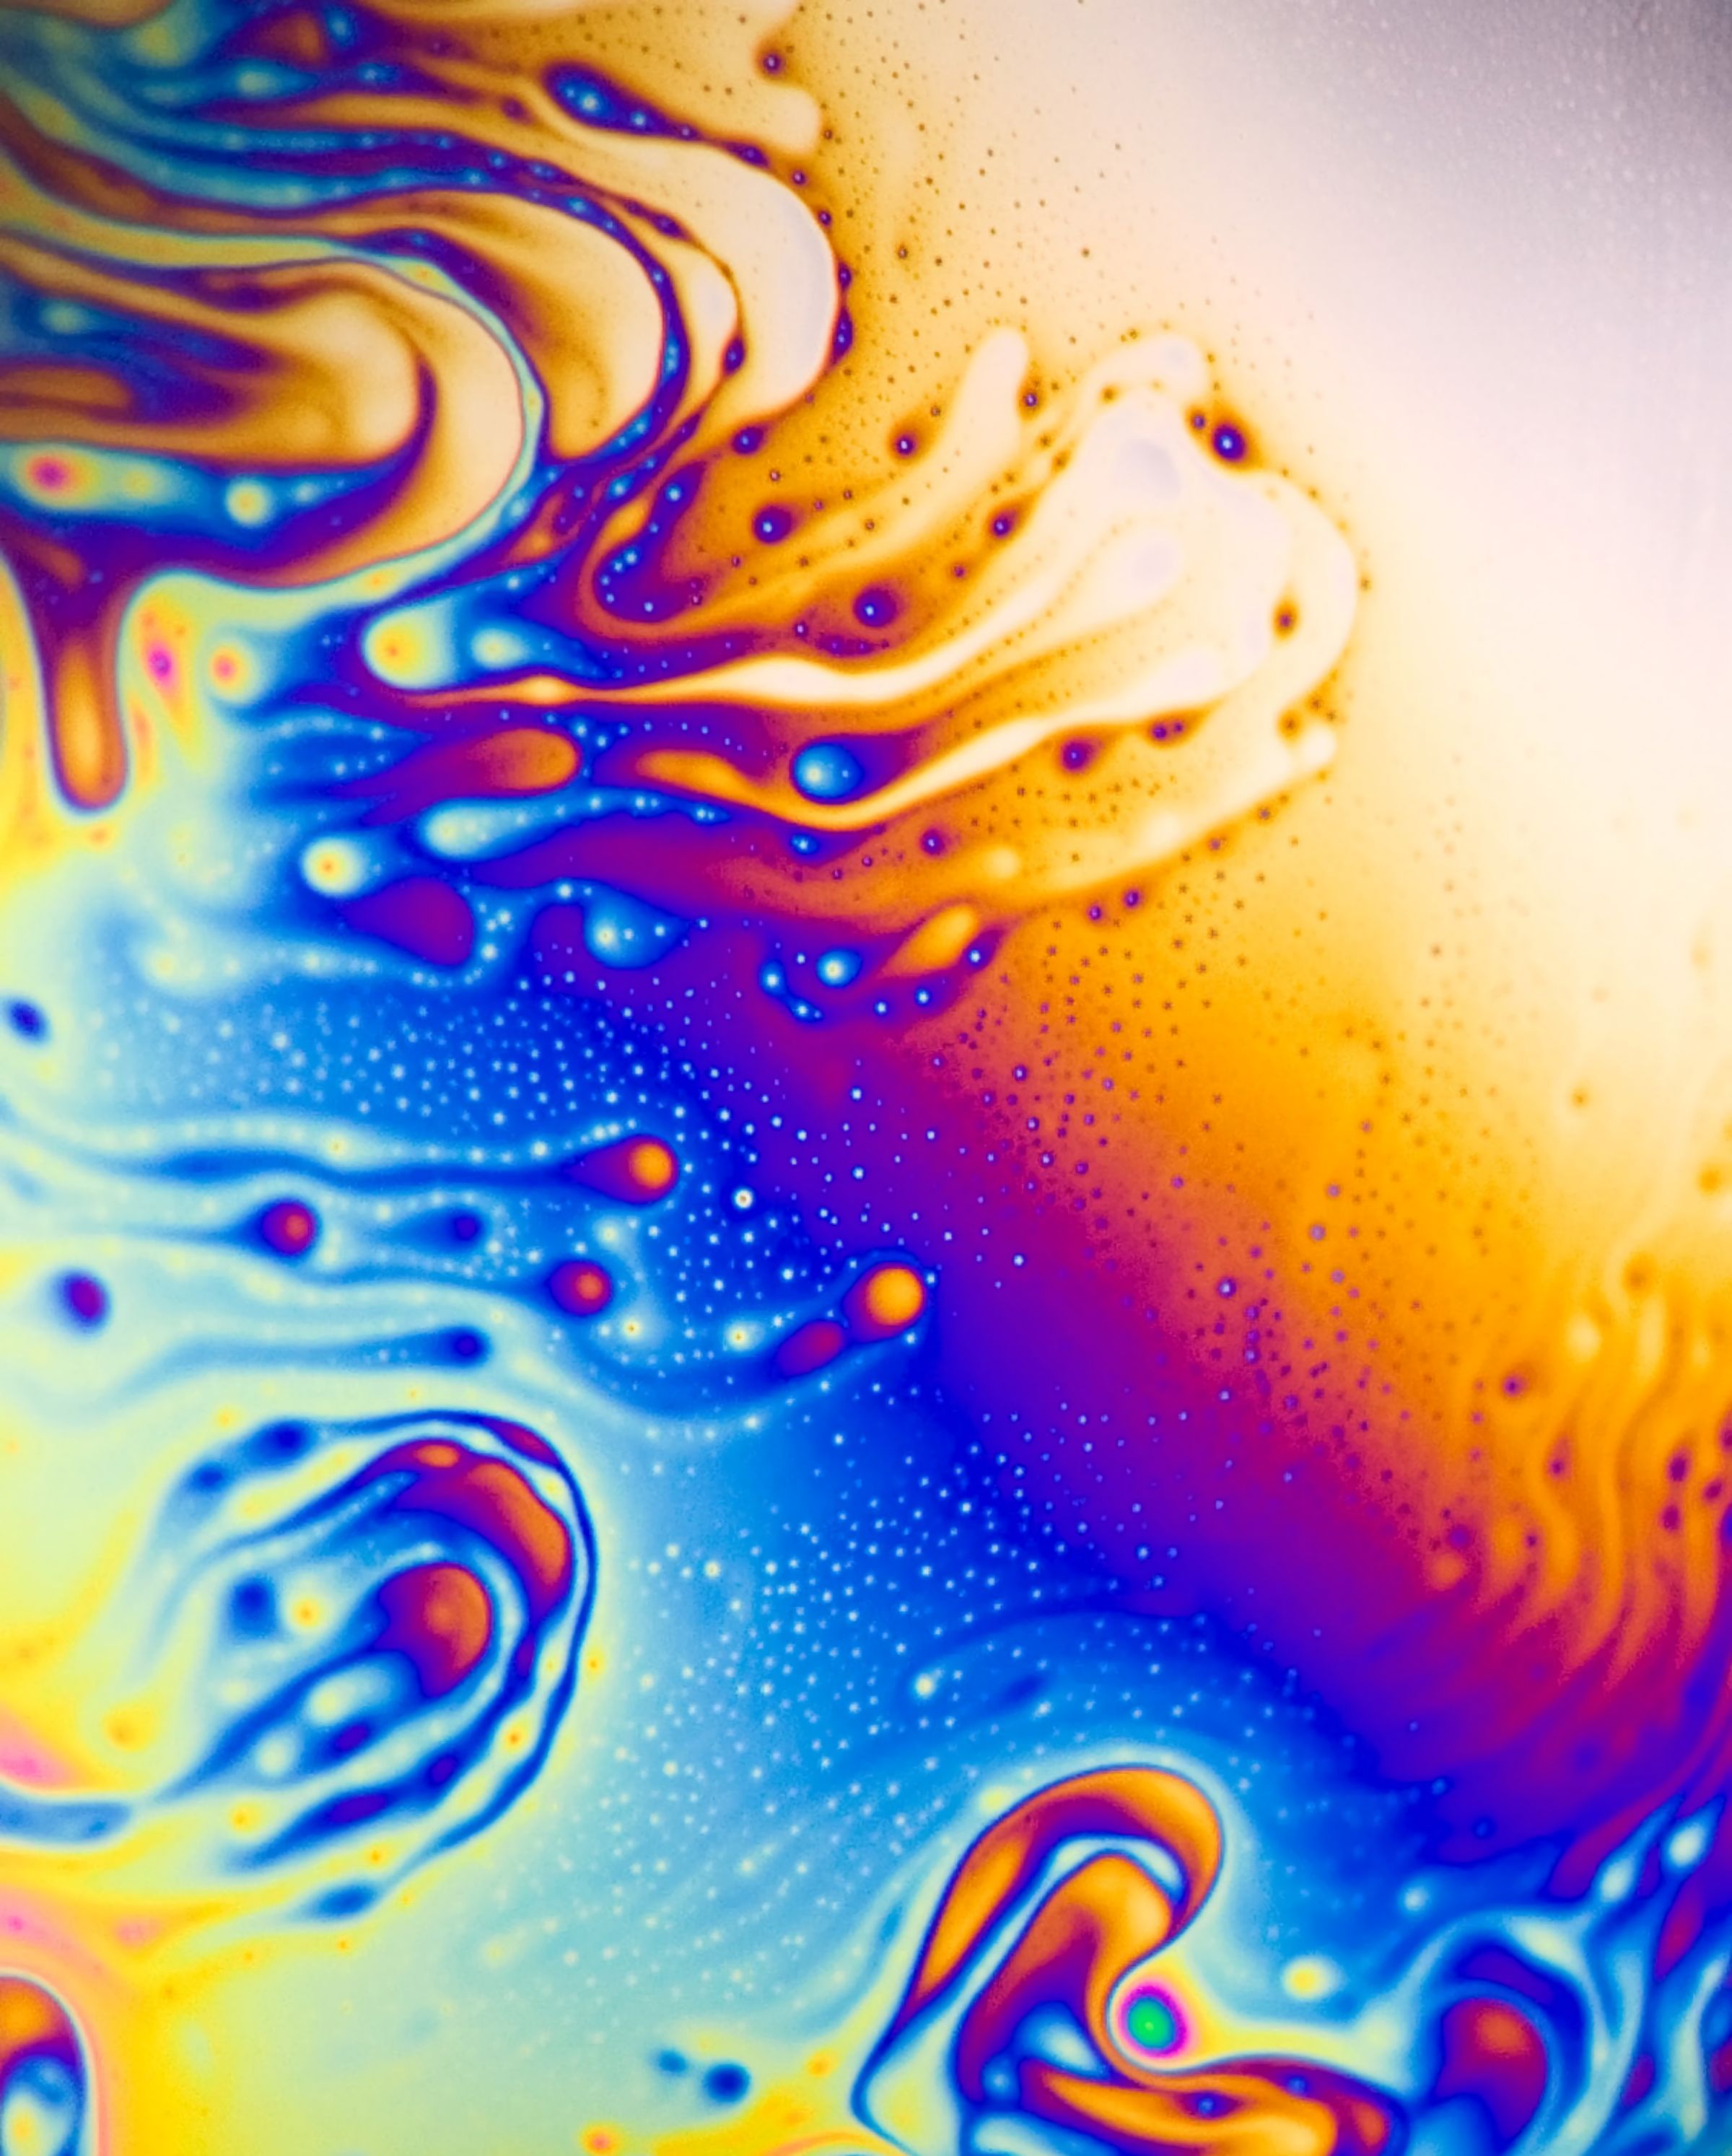 138134 download wallpaper stains, lines, patterns, macro, liquid, surface, spots screensavers and pictures for free